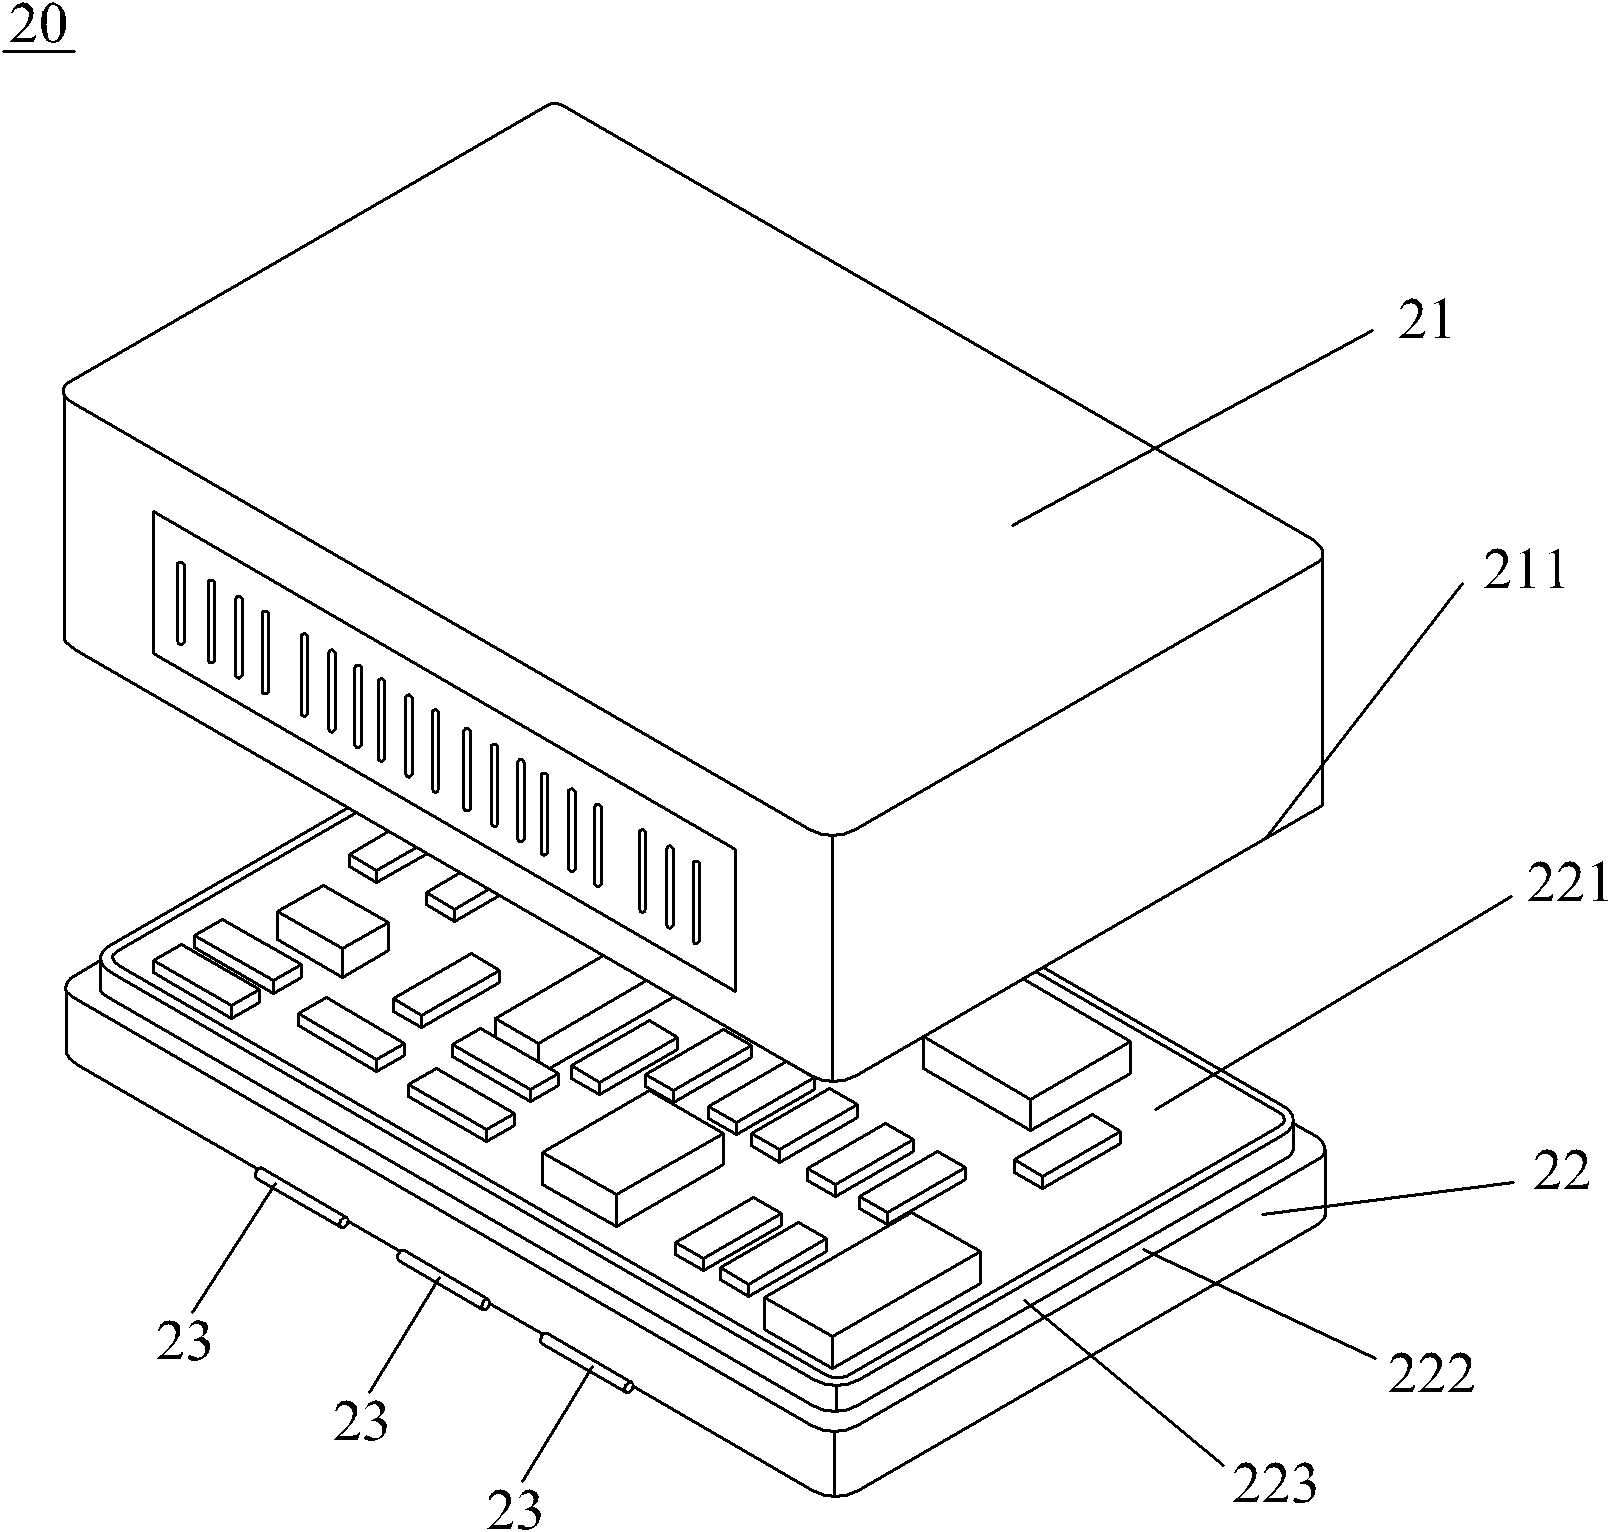 Method for making and packaging printed circuit board (PCB) and crystal oscillator